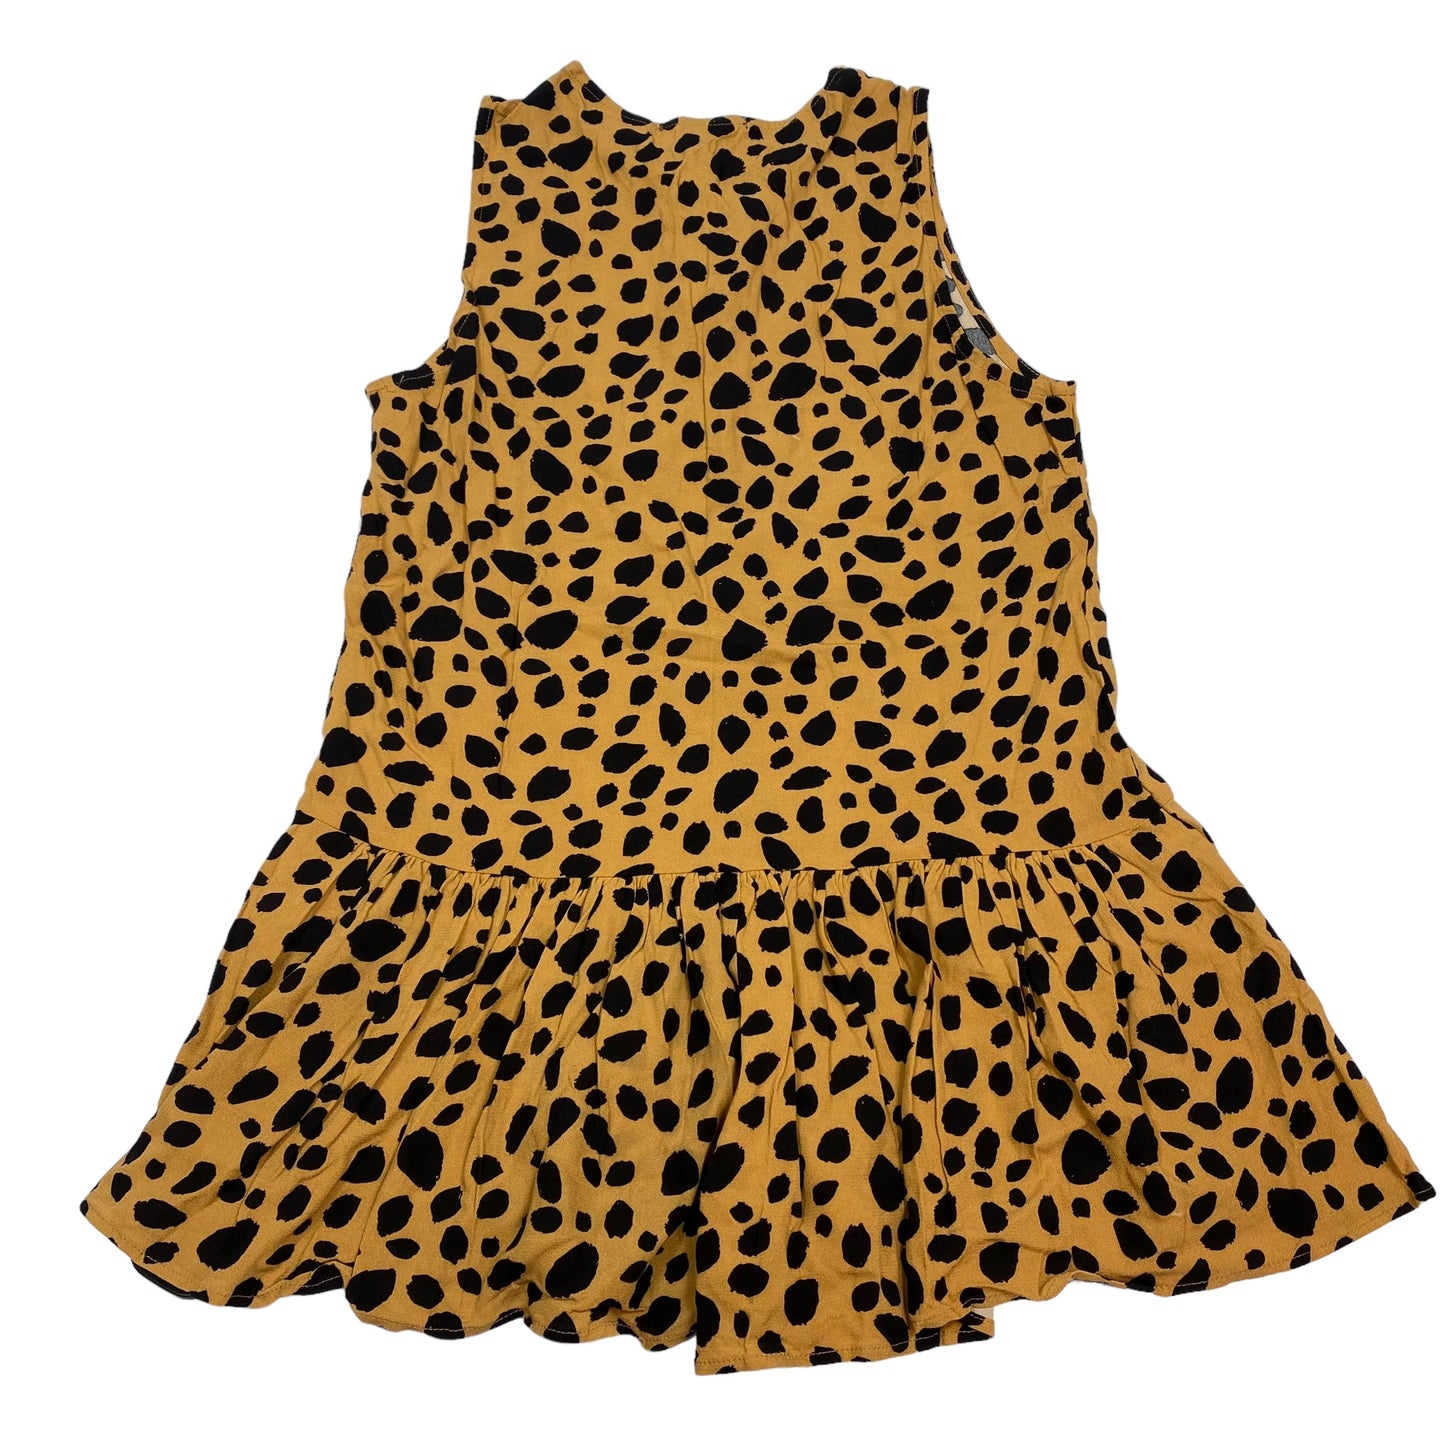 Animal Print Dress Casual Short Forever 21, Size S